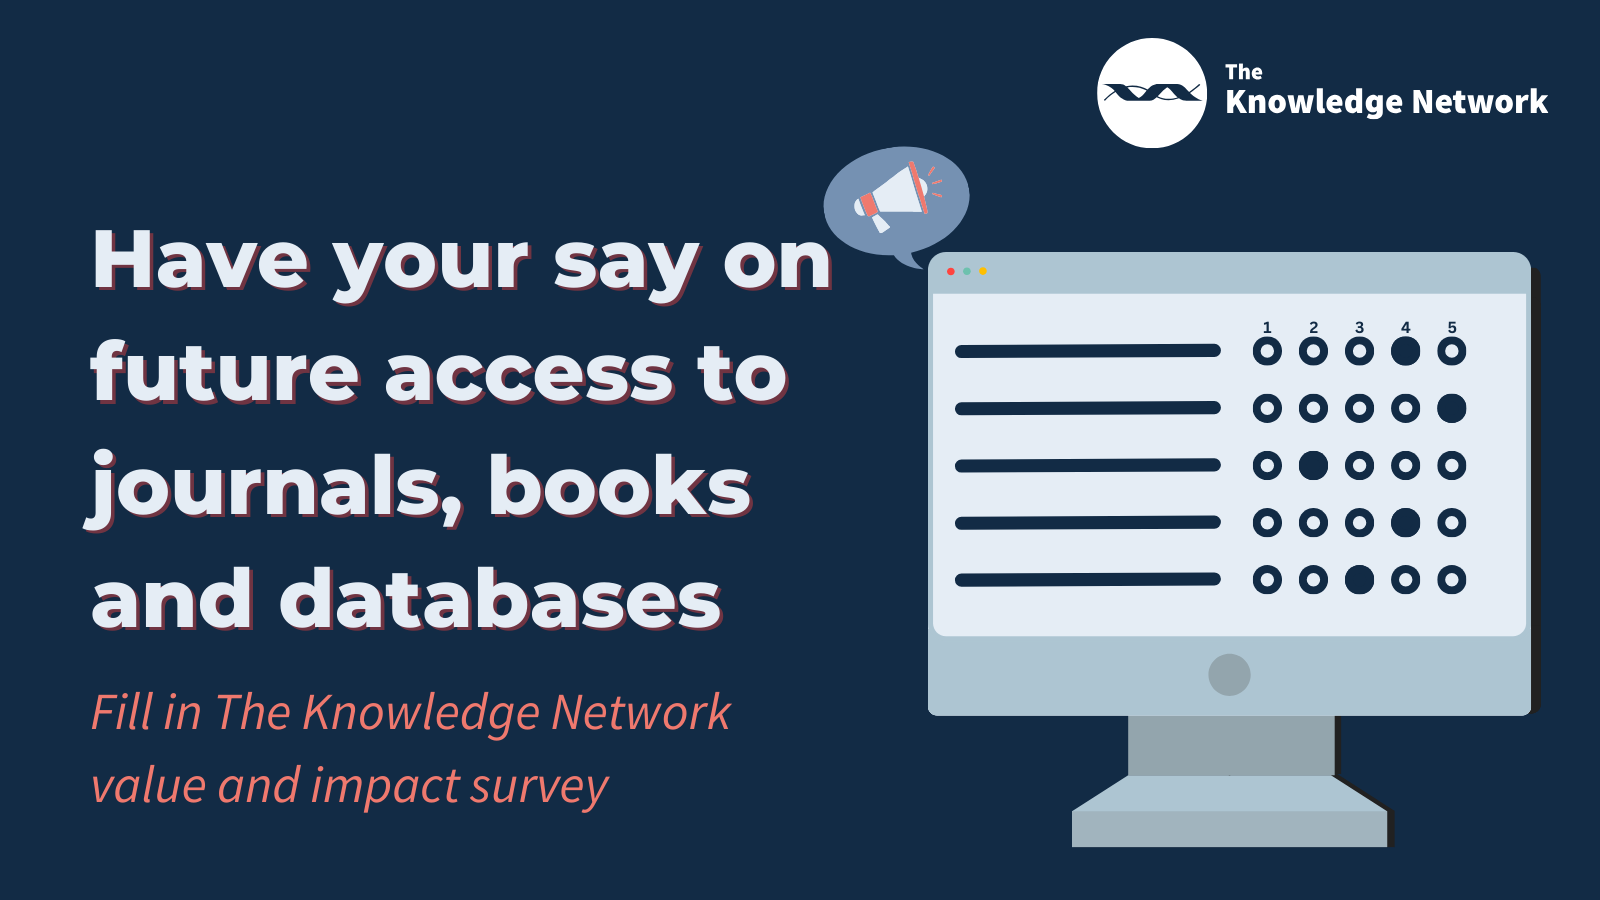 We need your feedback – The Knowledge Network value and impact survey